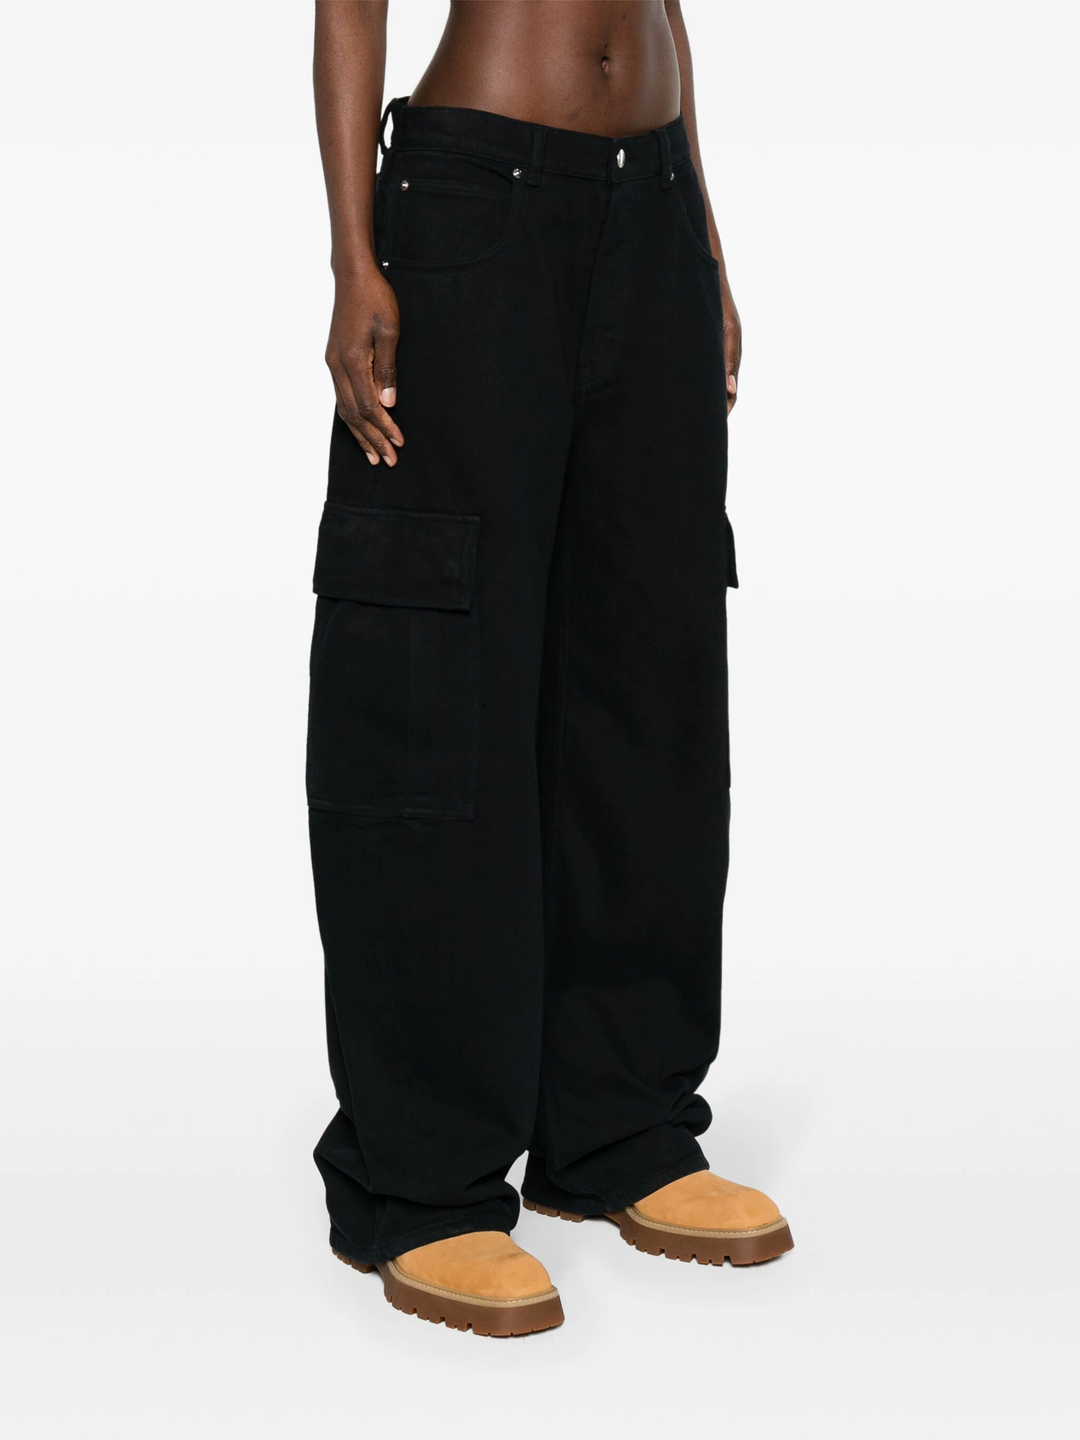 Oversized Rounded Low Rise Jeans